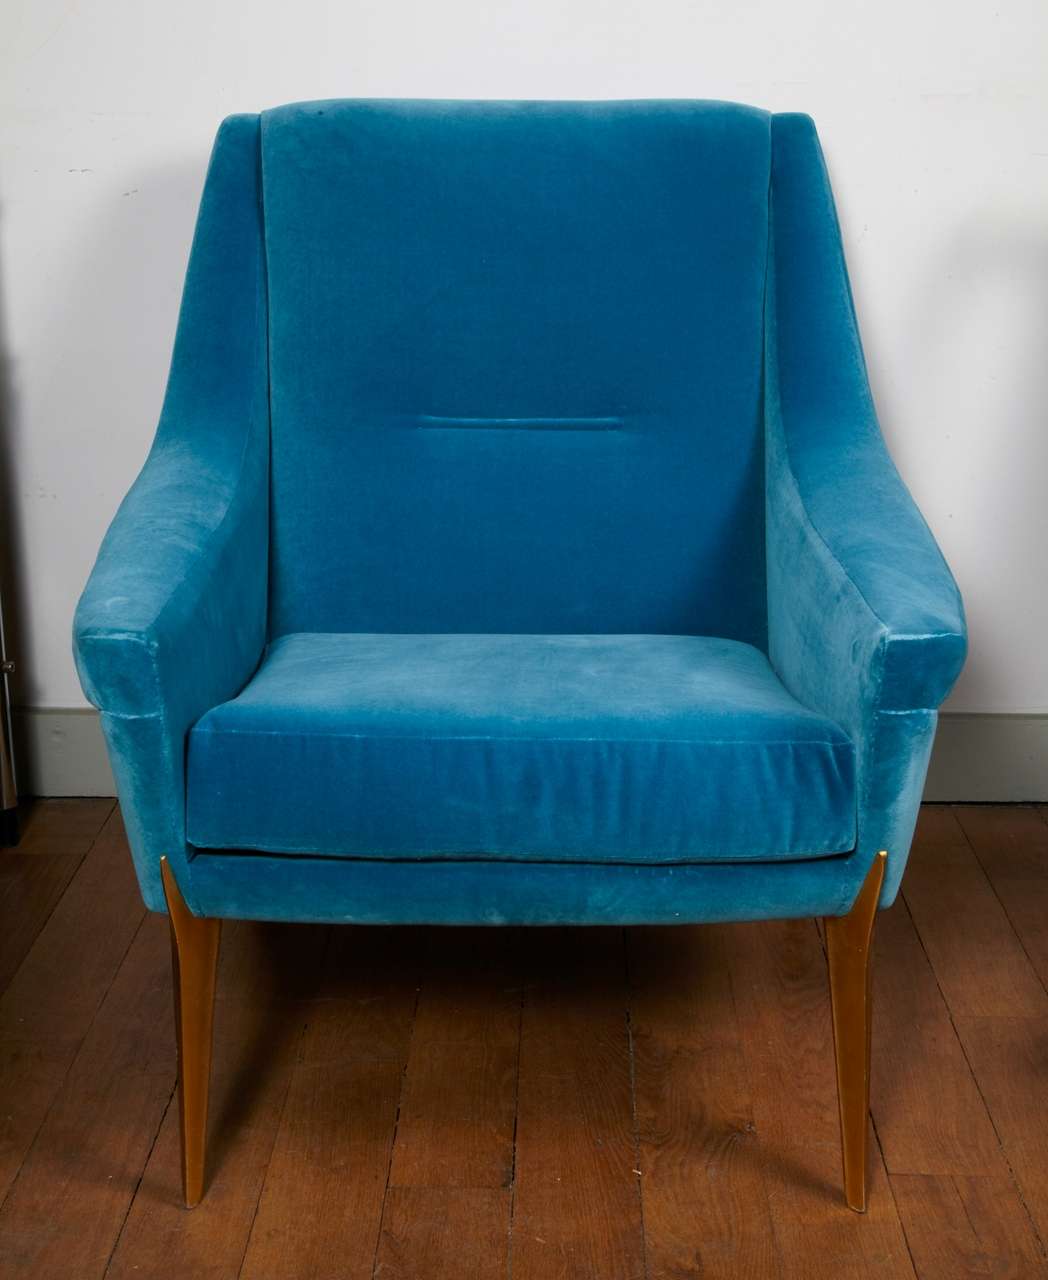 Beautiful armchair by Charles Ramos reupholstored with a Kvadrat fabric